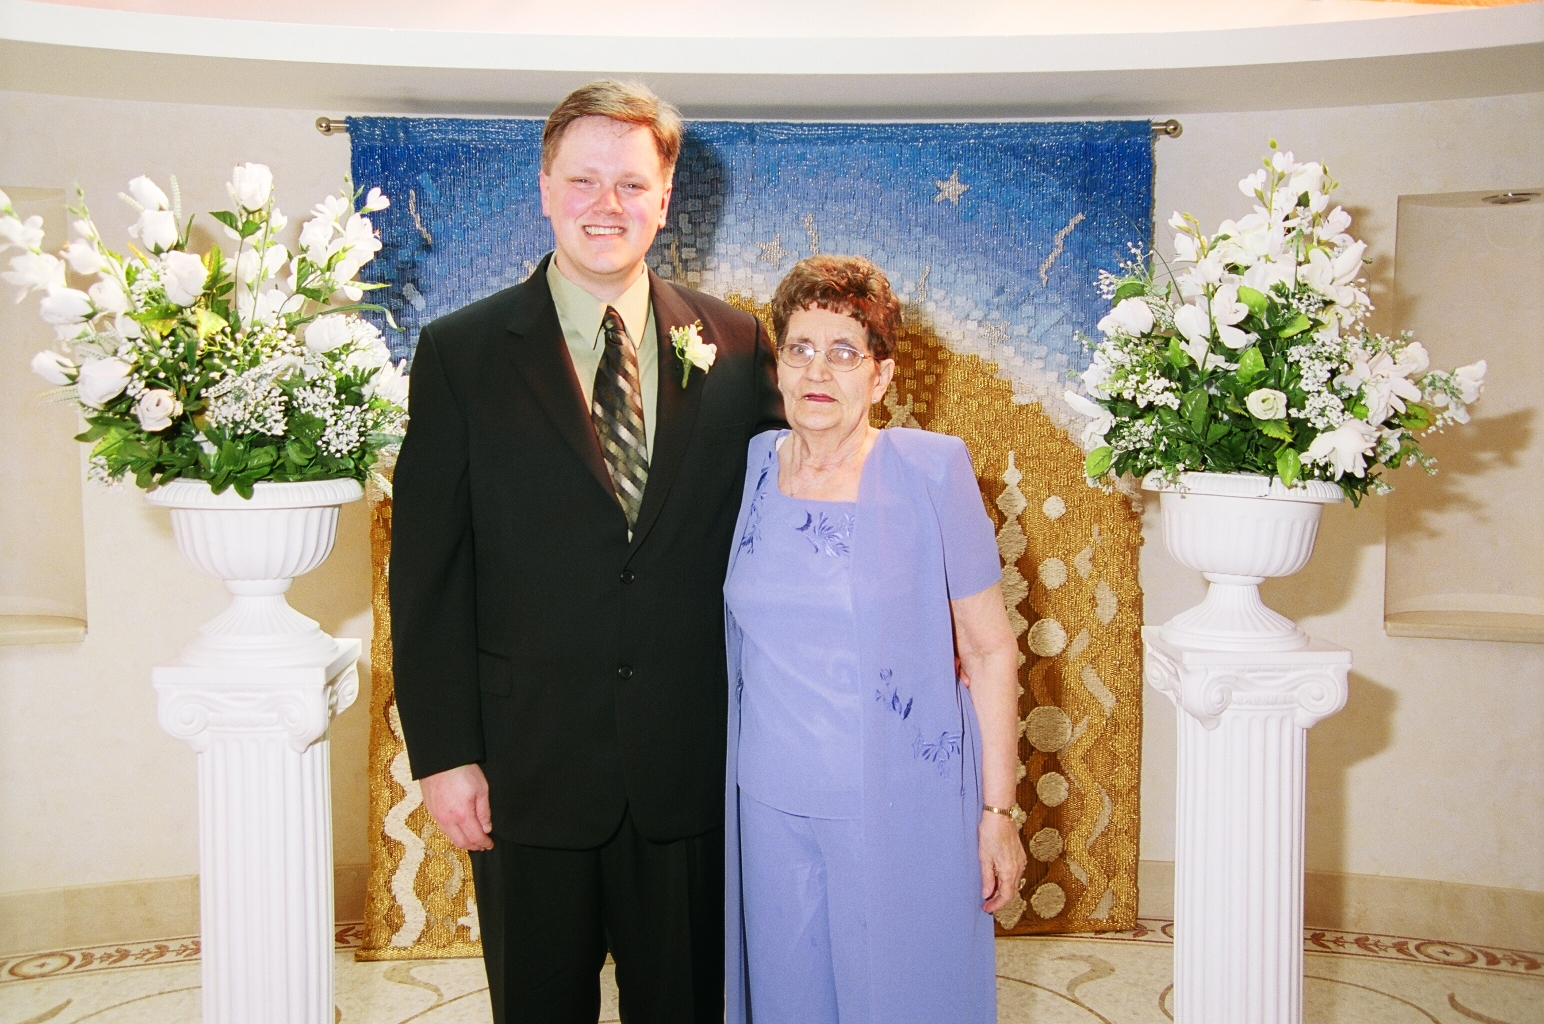 Ed and his Mom at the altar